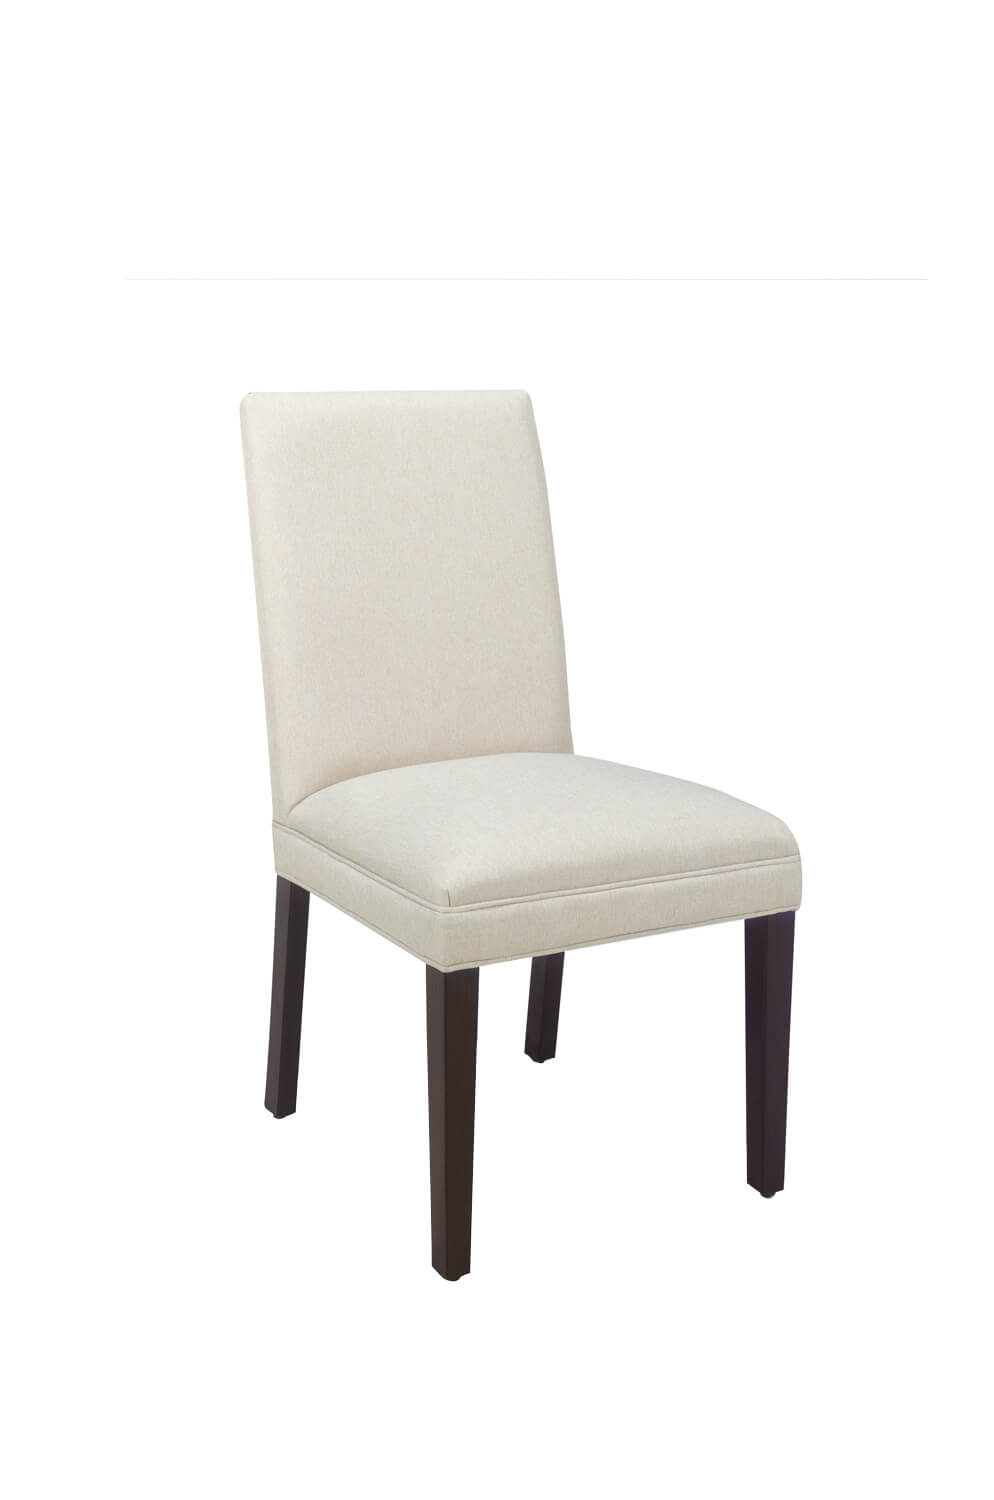 #800 Modern Upholstered Wood Dining Chair